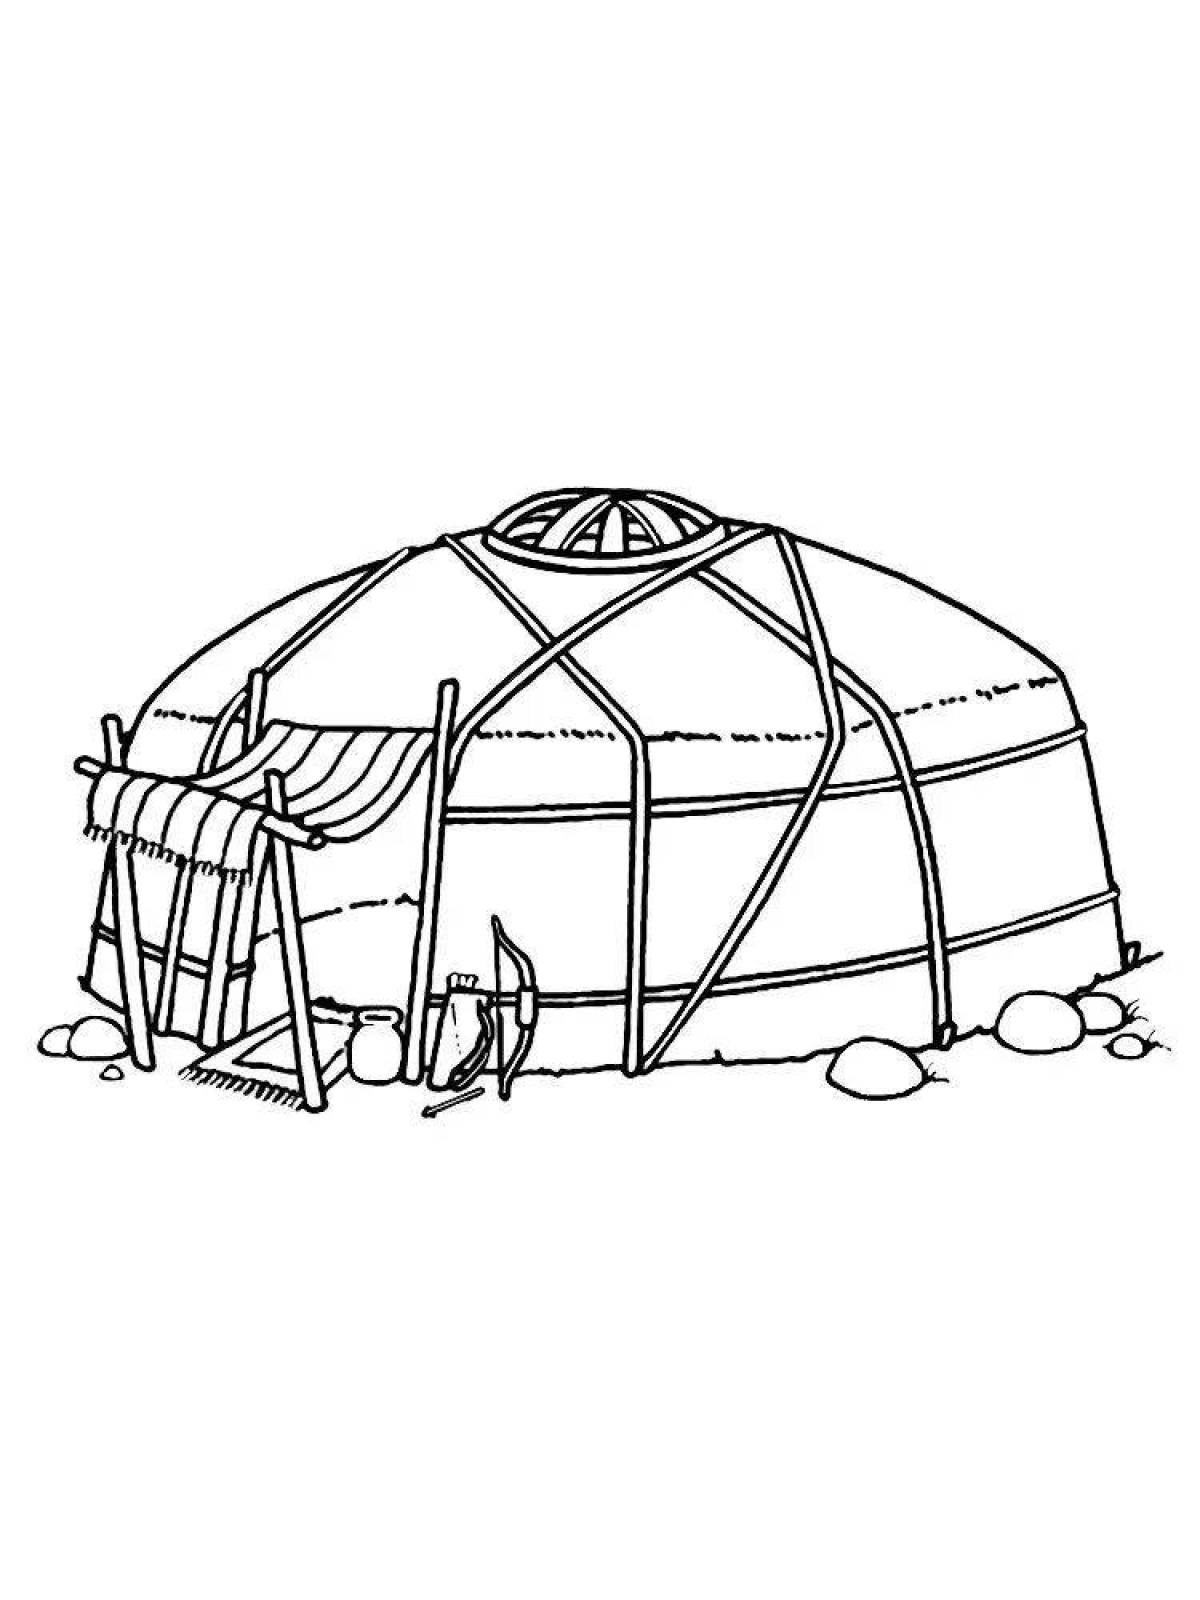 Luxury yurt coloring page